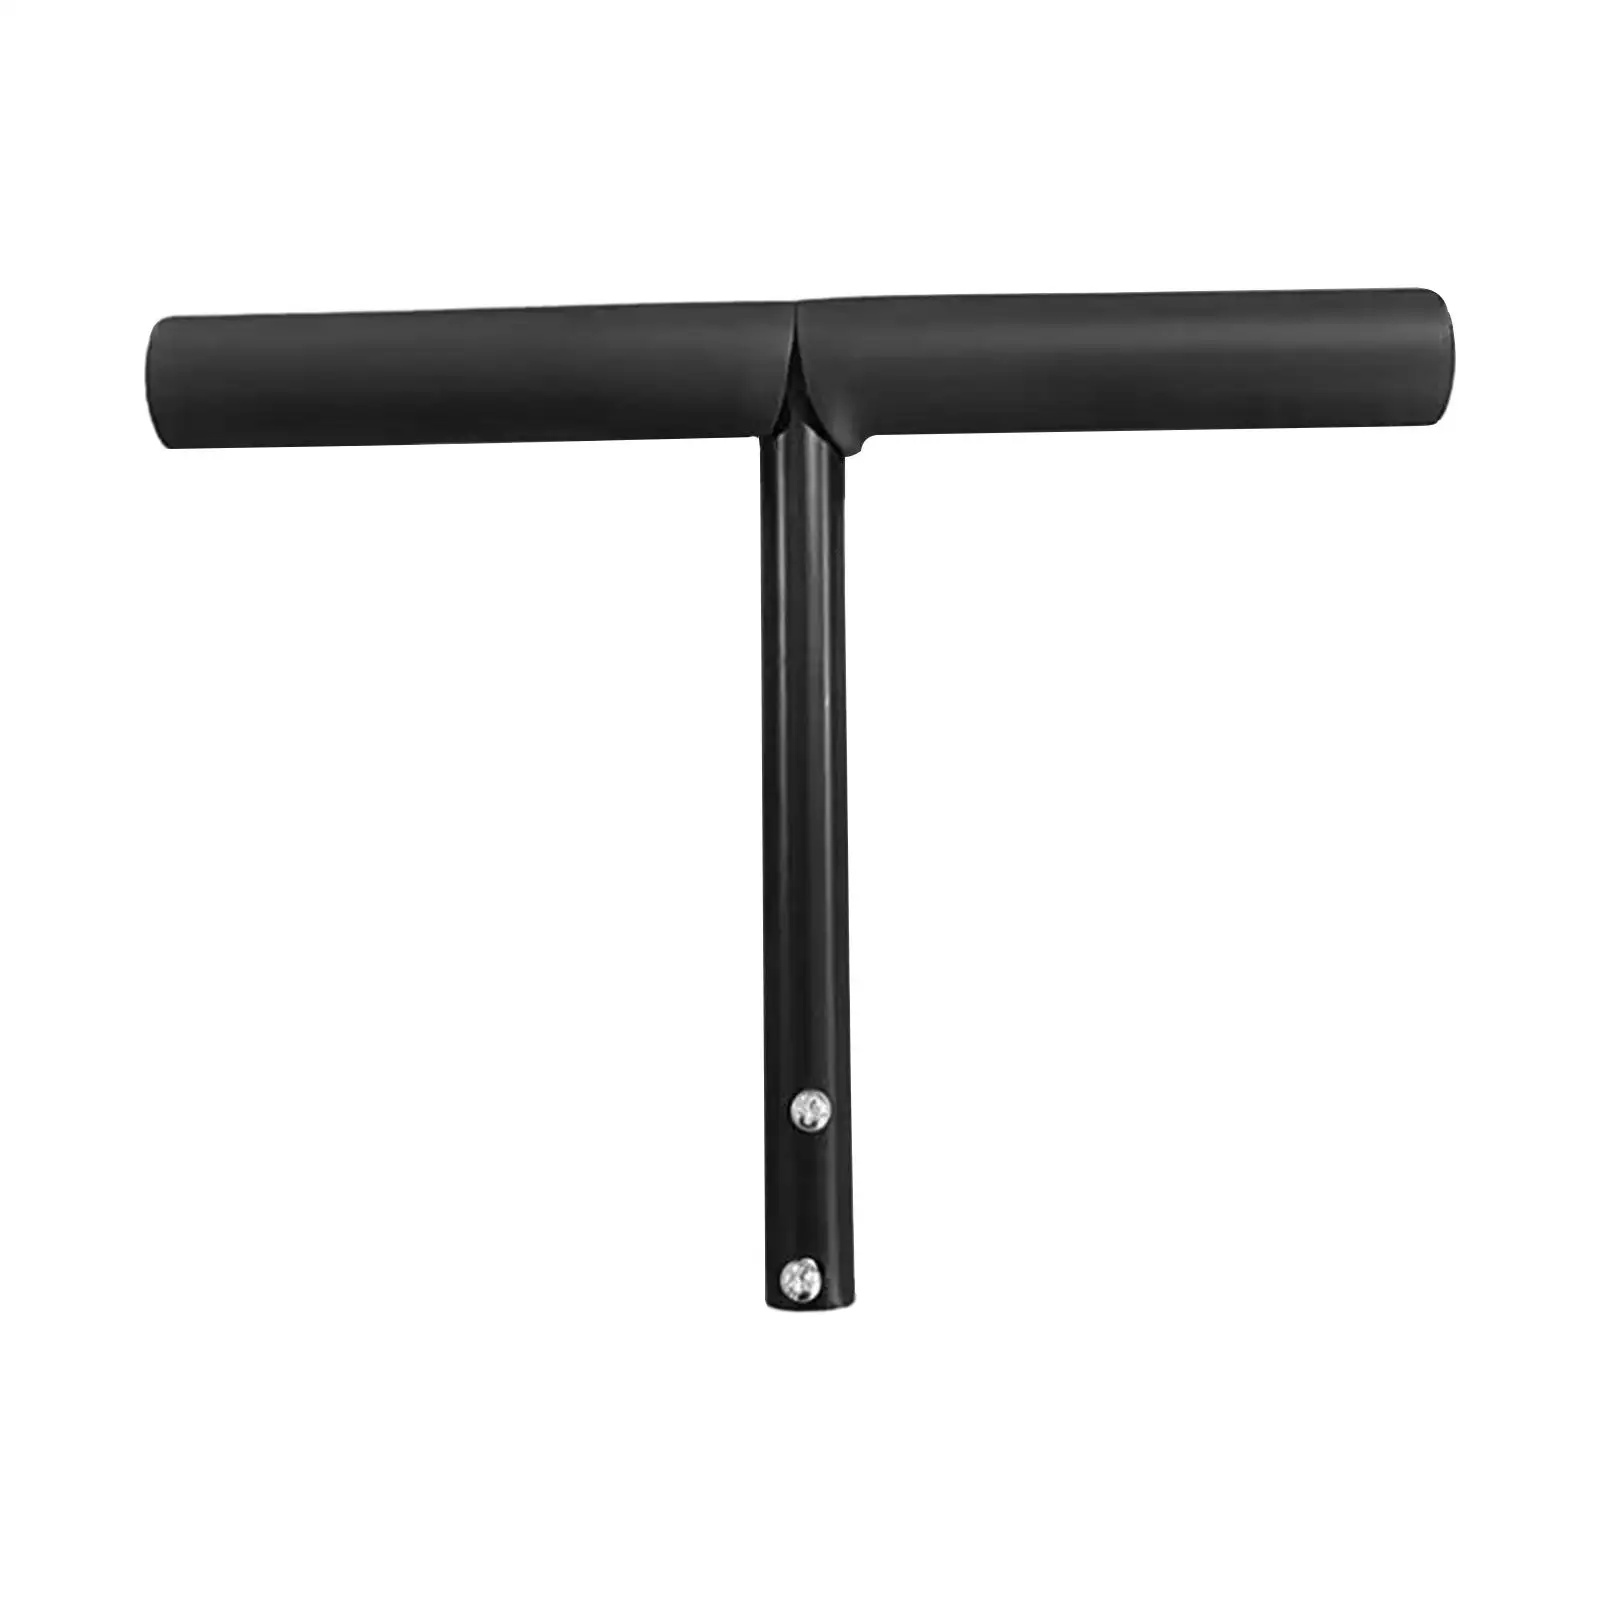 T Shaped Push Handle Bar, Replacement Parts, Sturdy, Kids Tricycle Accessories